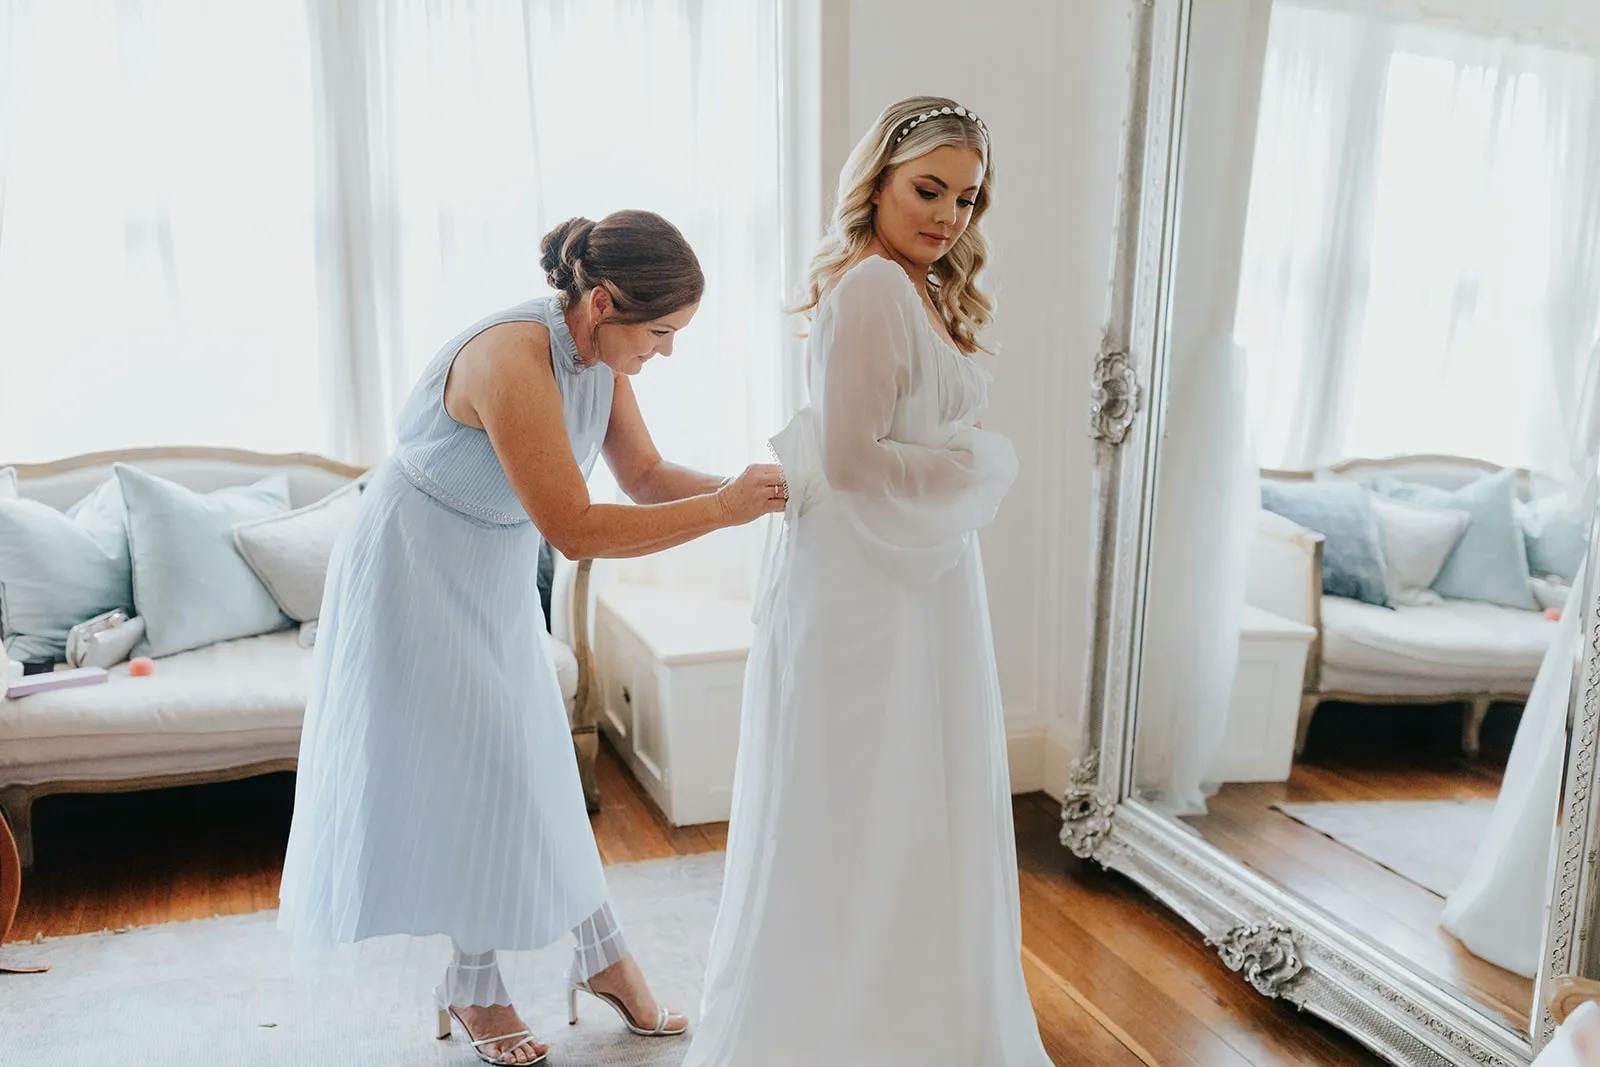 Bride getting dressed with mother